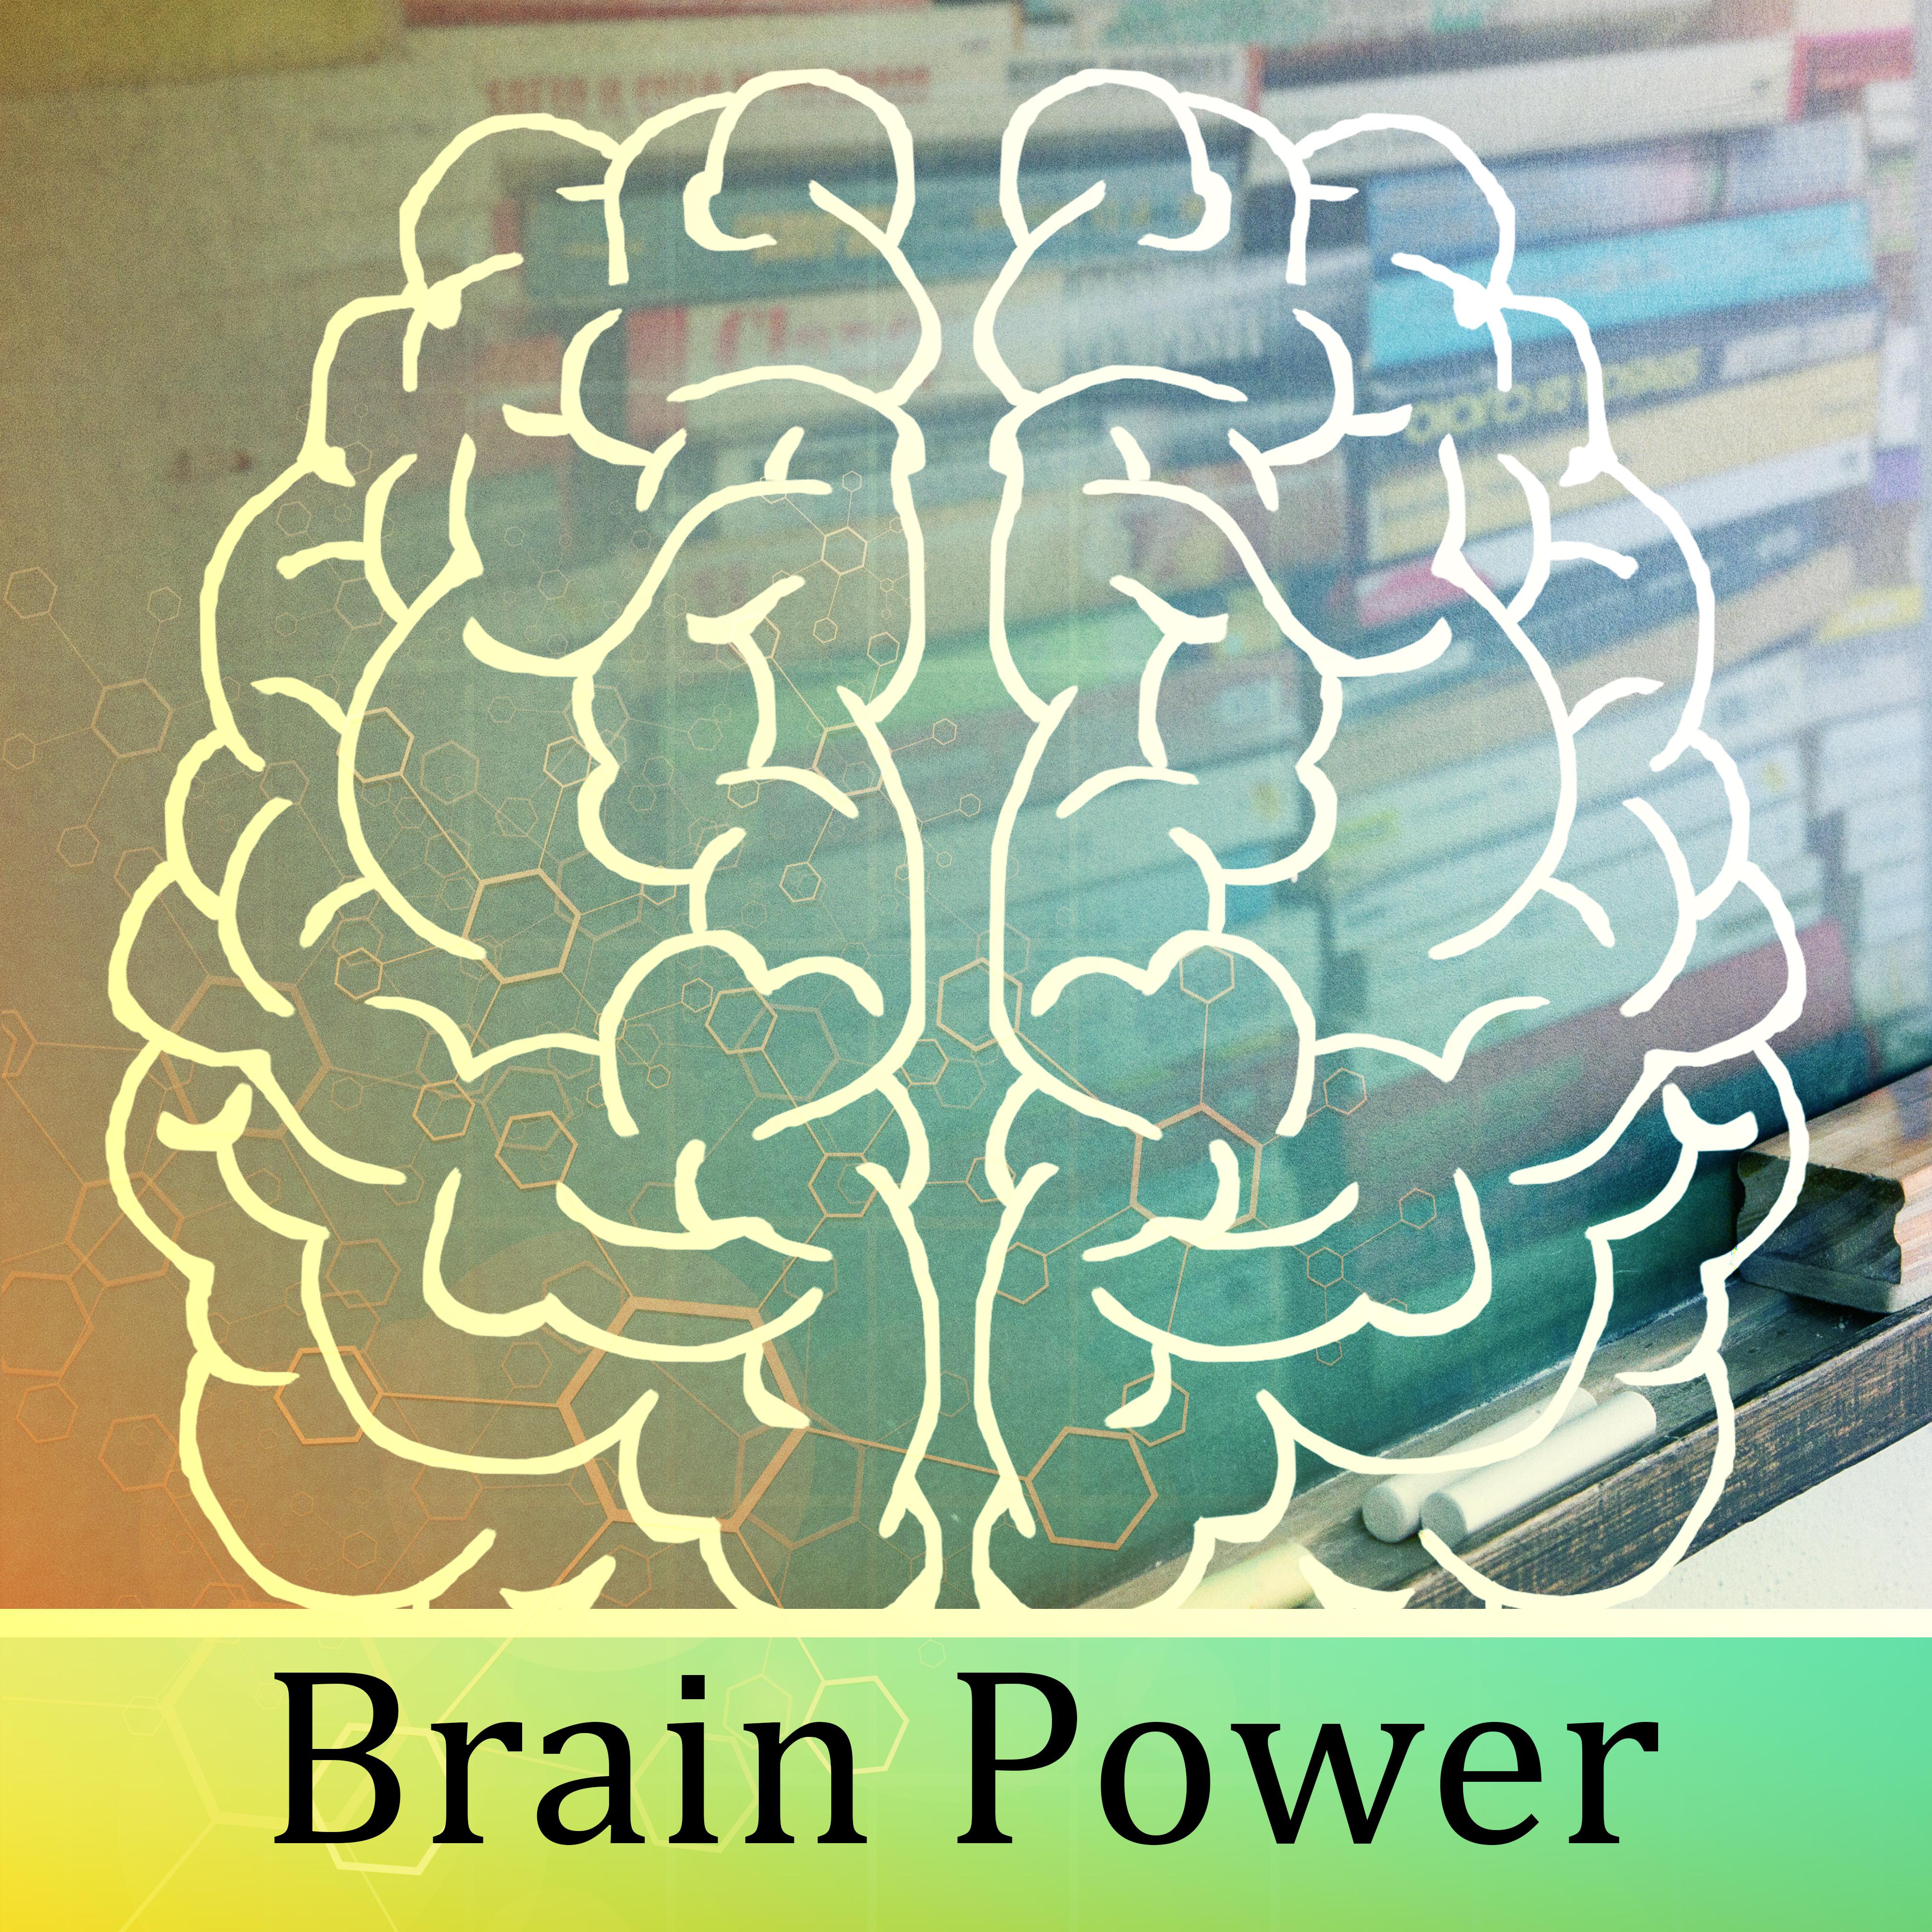 Brain Power – Soft Nature Sounds for Study, Zen Learning, Stress Free, Deep Focus, Concentration, Train Memory